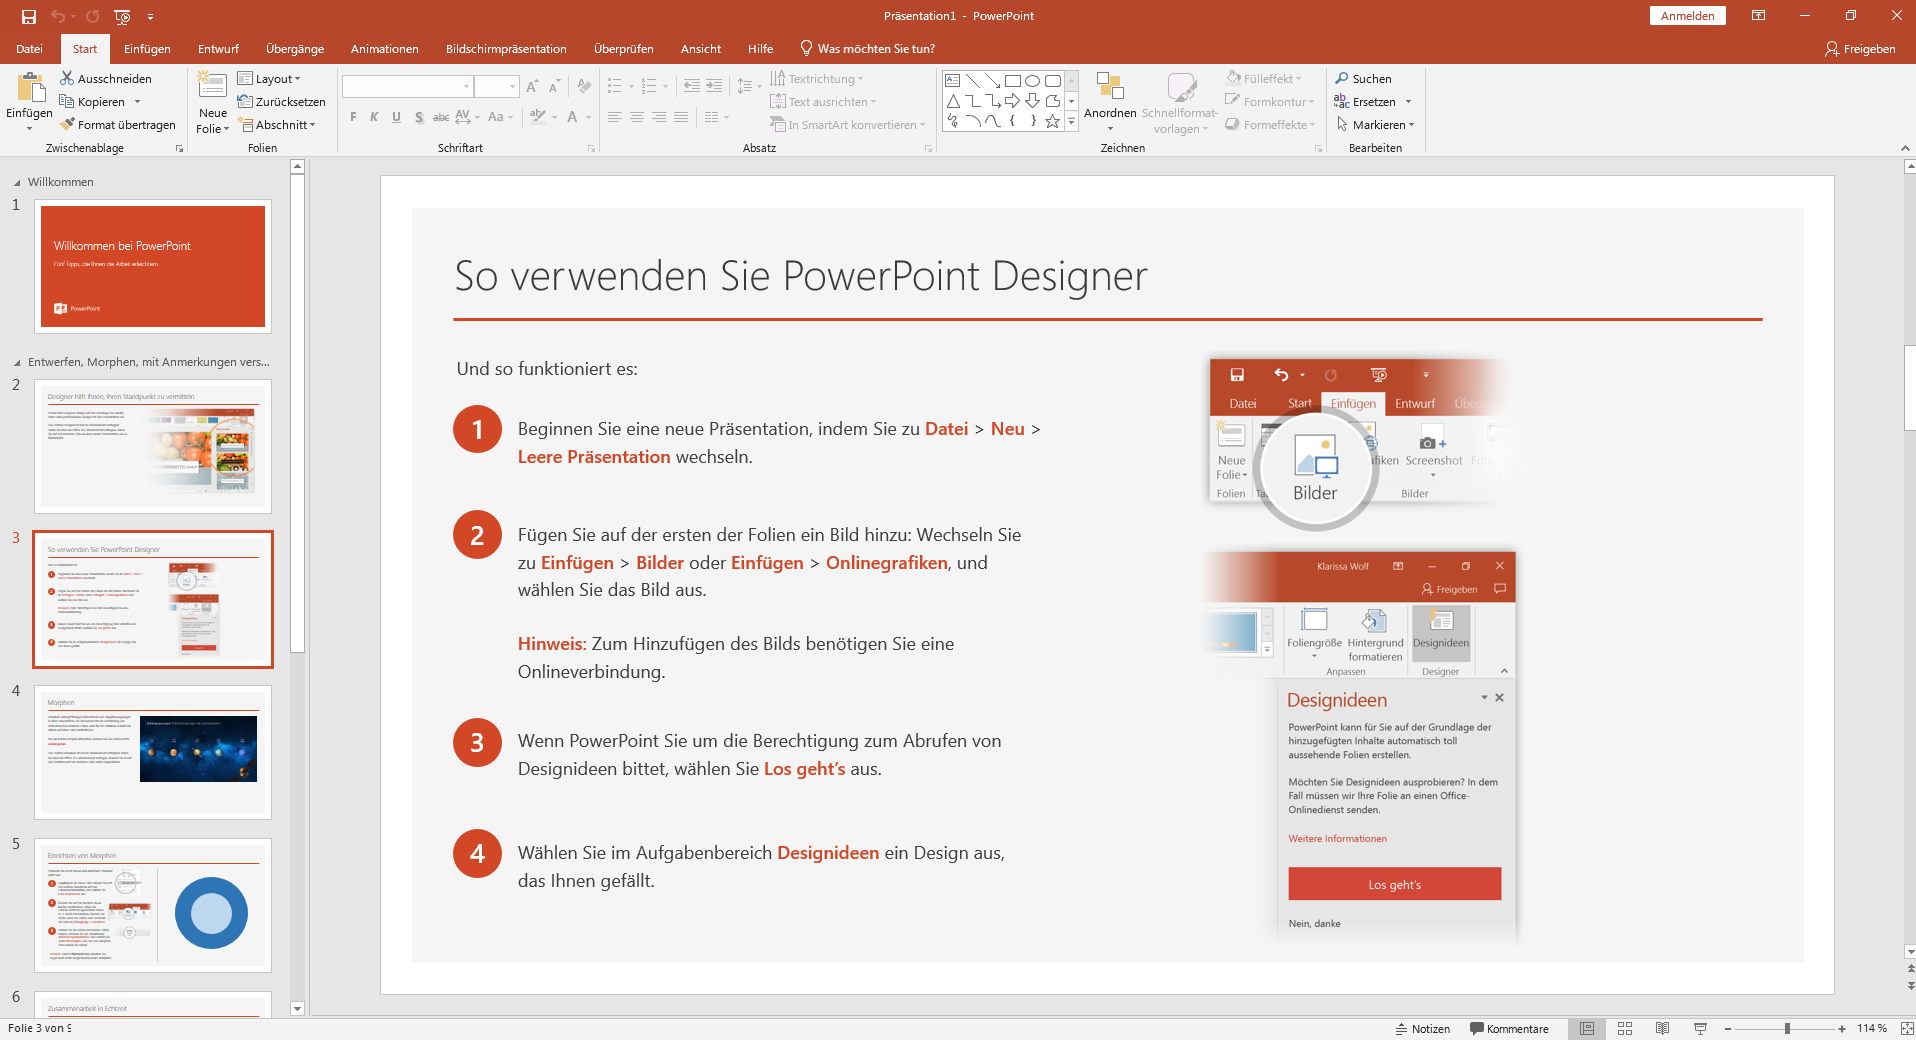 power point 2019 download